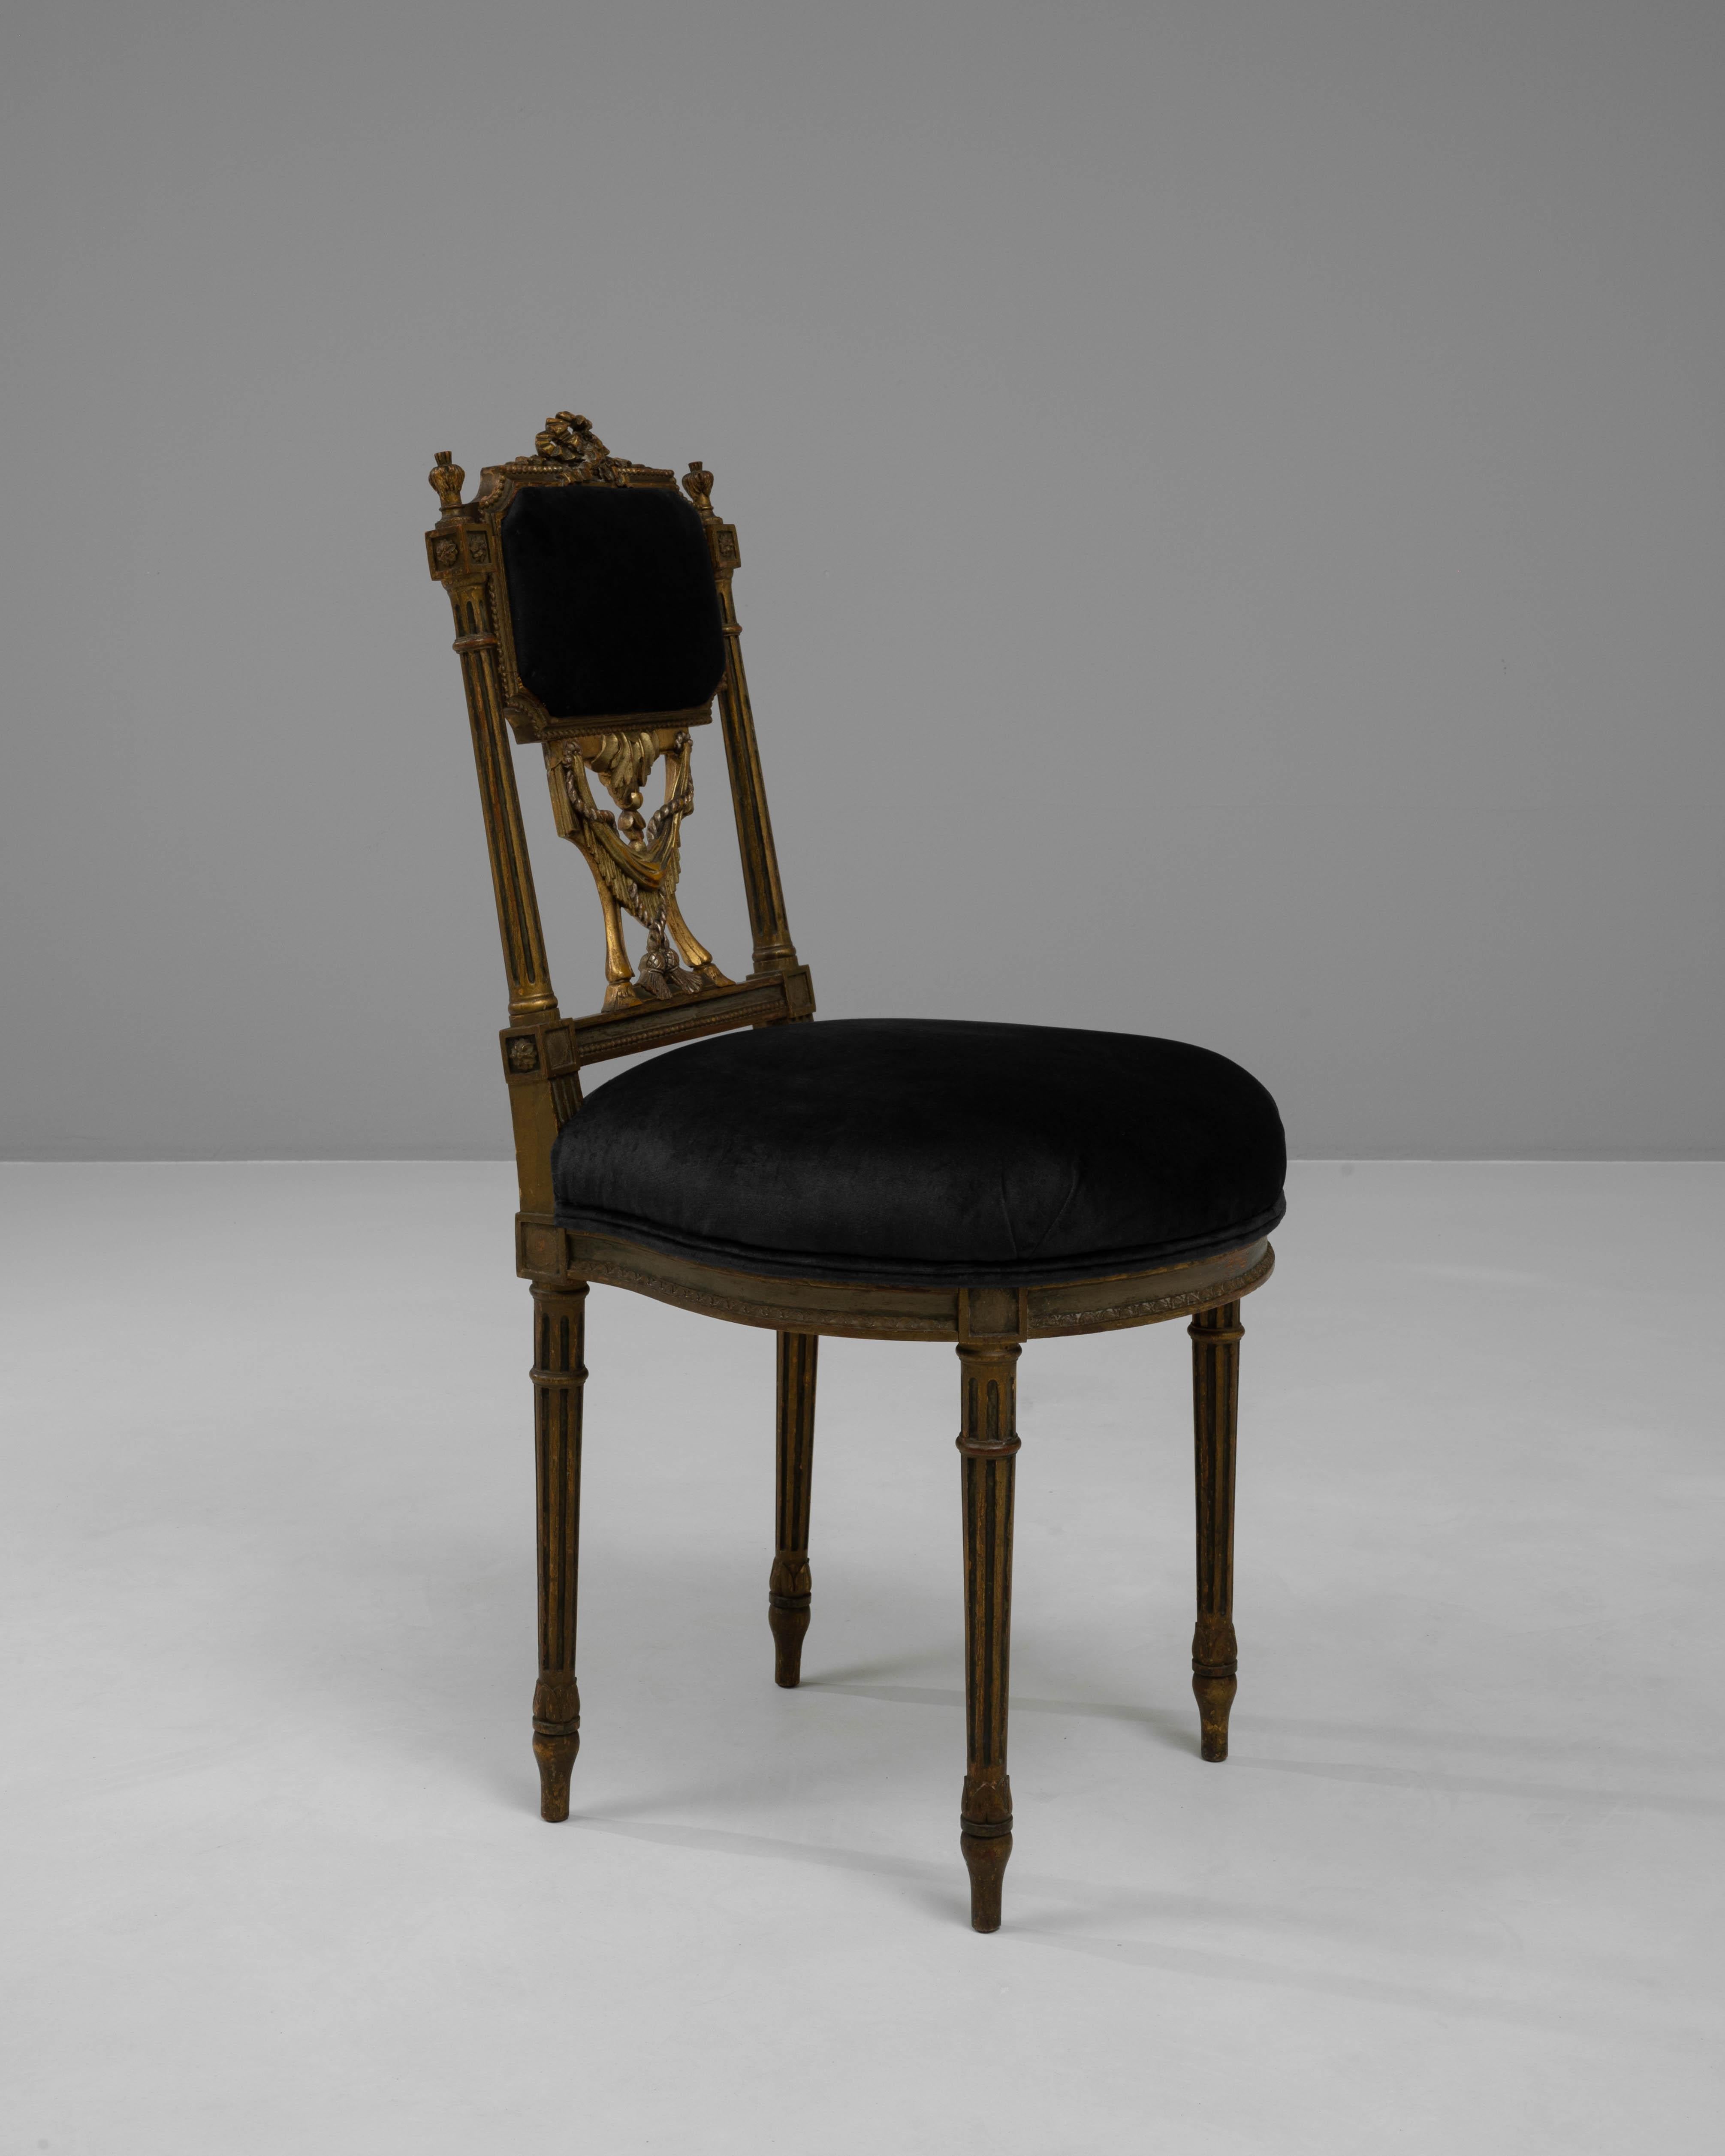 Step into a world of regal opulence with this magnificent 19th Century French Wooden Chair, a piece that embodies the grandeur of historical French design. This chair features an exquisite frame with intricate gold gilded carvings, including florals